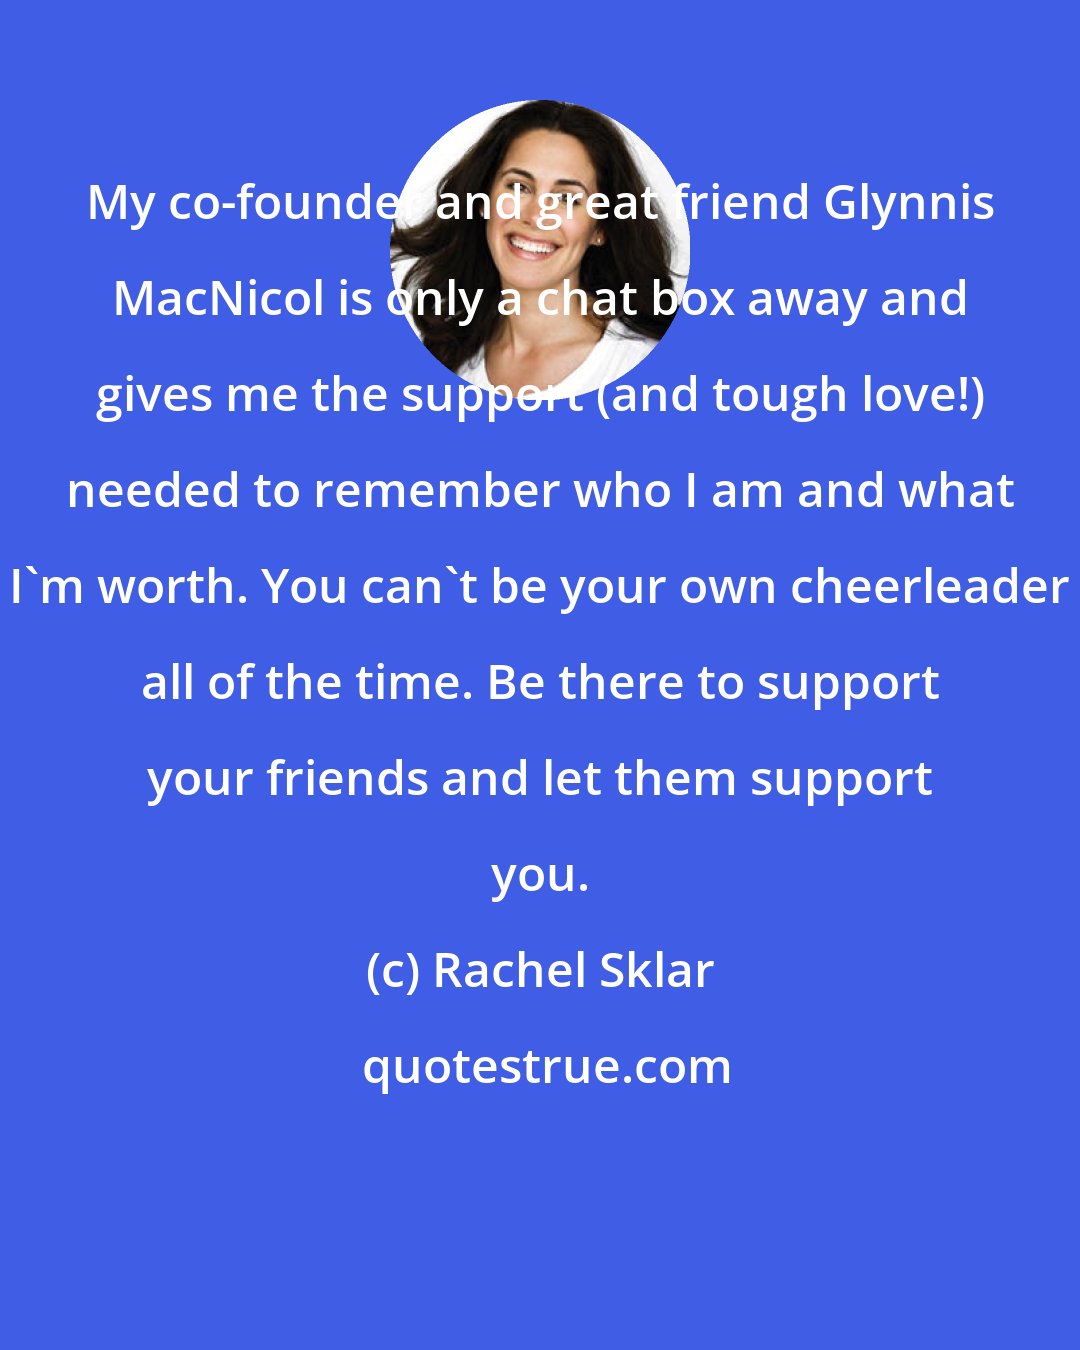 Rachel Sklar: My co-founder and great friend Glynnis MacNicol is only a chat box away and gives me the support (and tough love!) needed to remember who I am and what I'm worth. You can't be your own cheerleader all of the time. Be there to support your friends and let them support you.